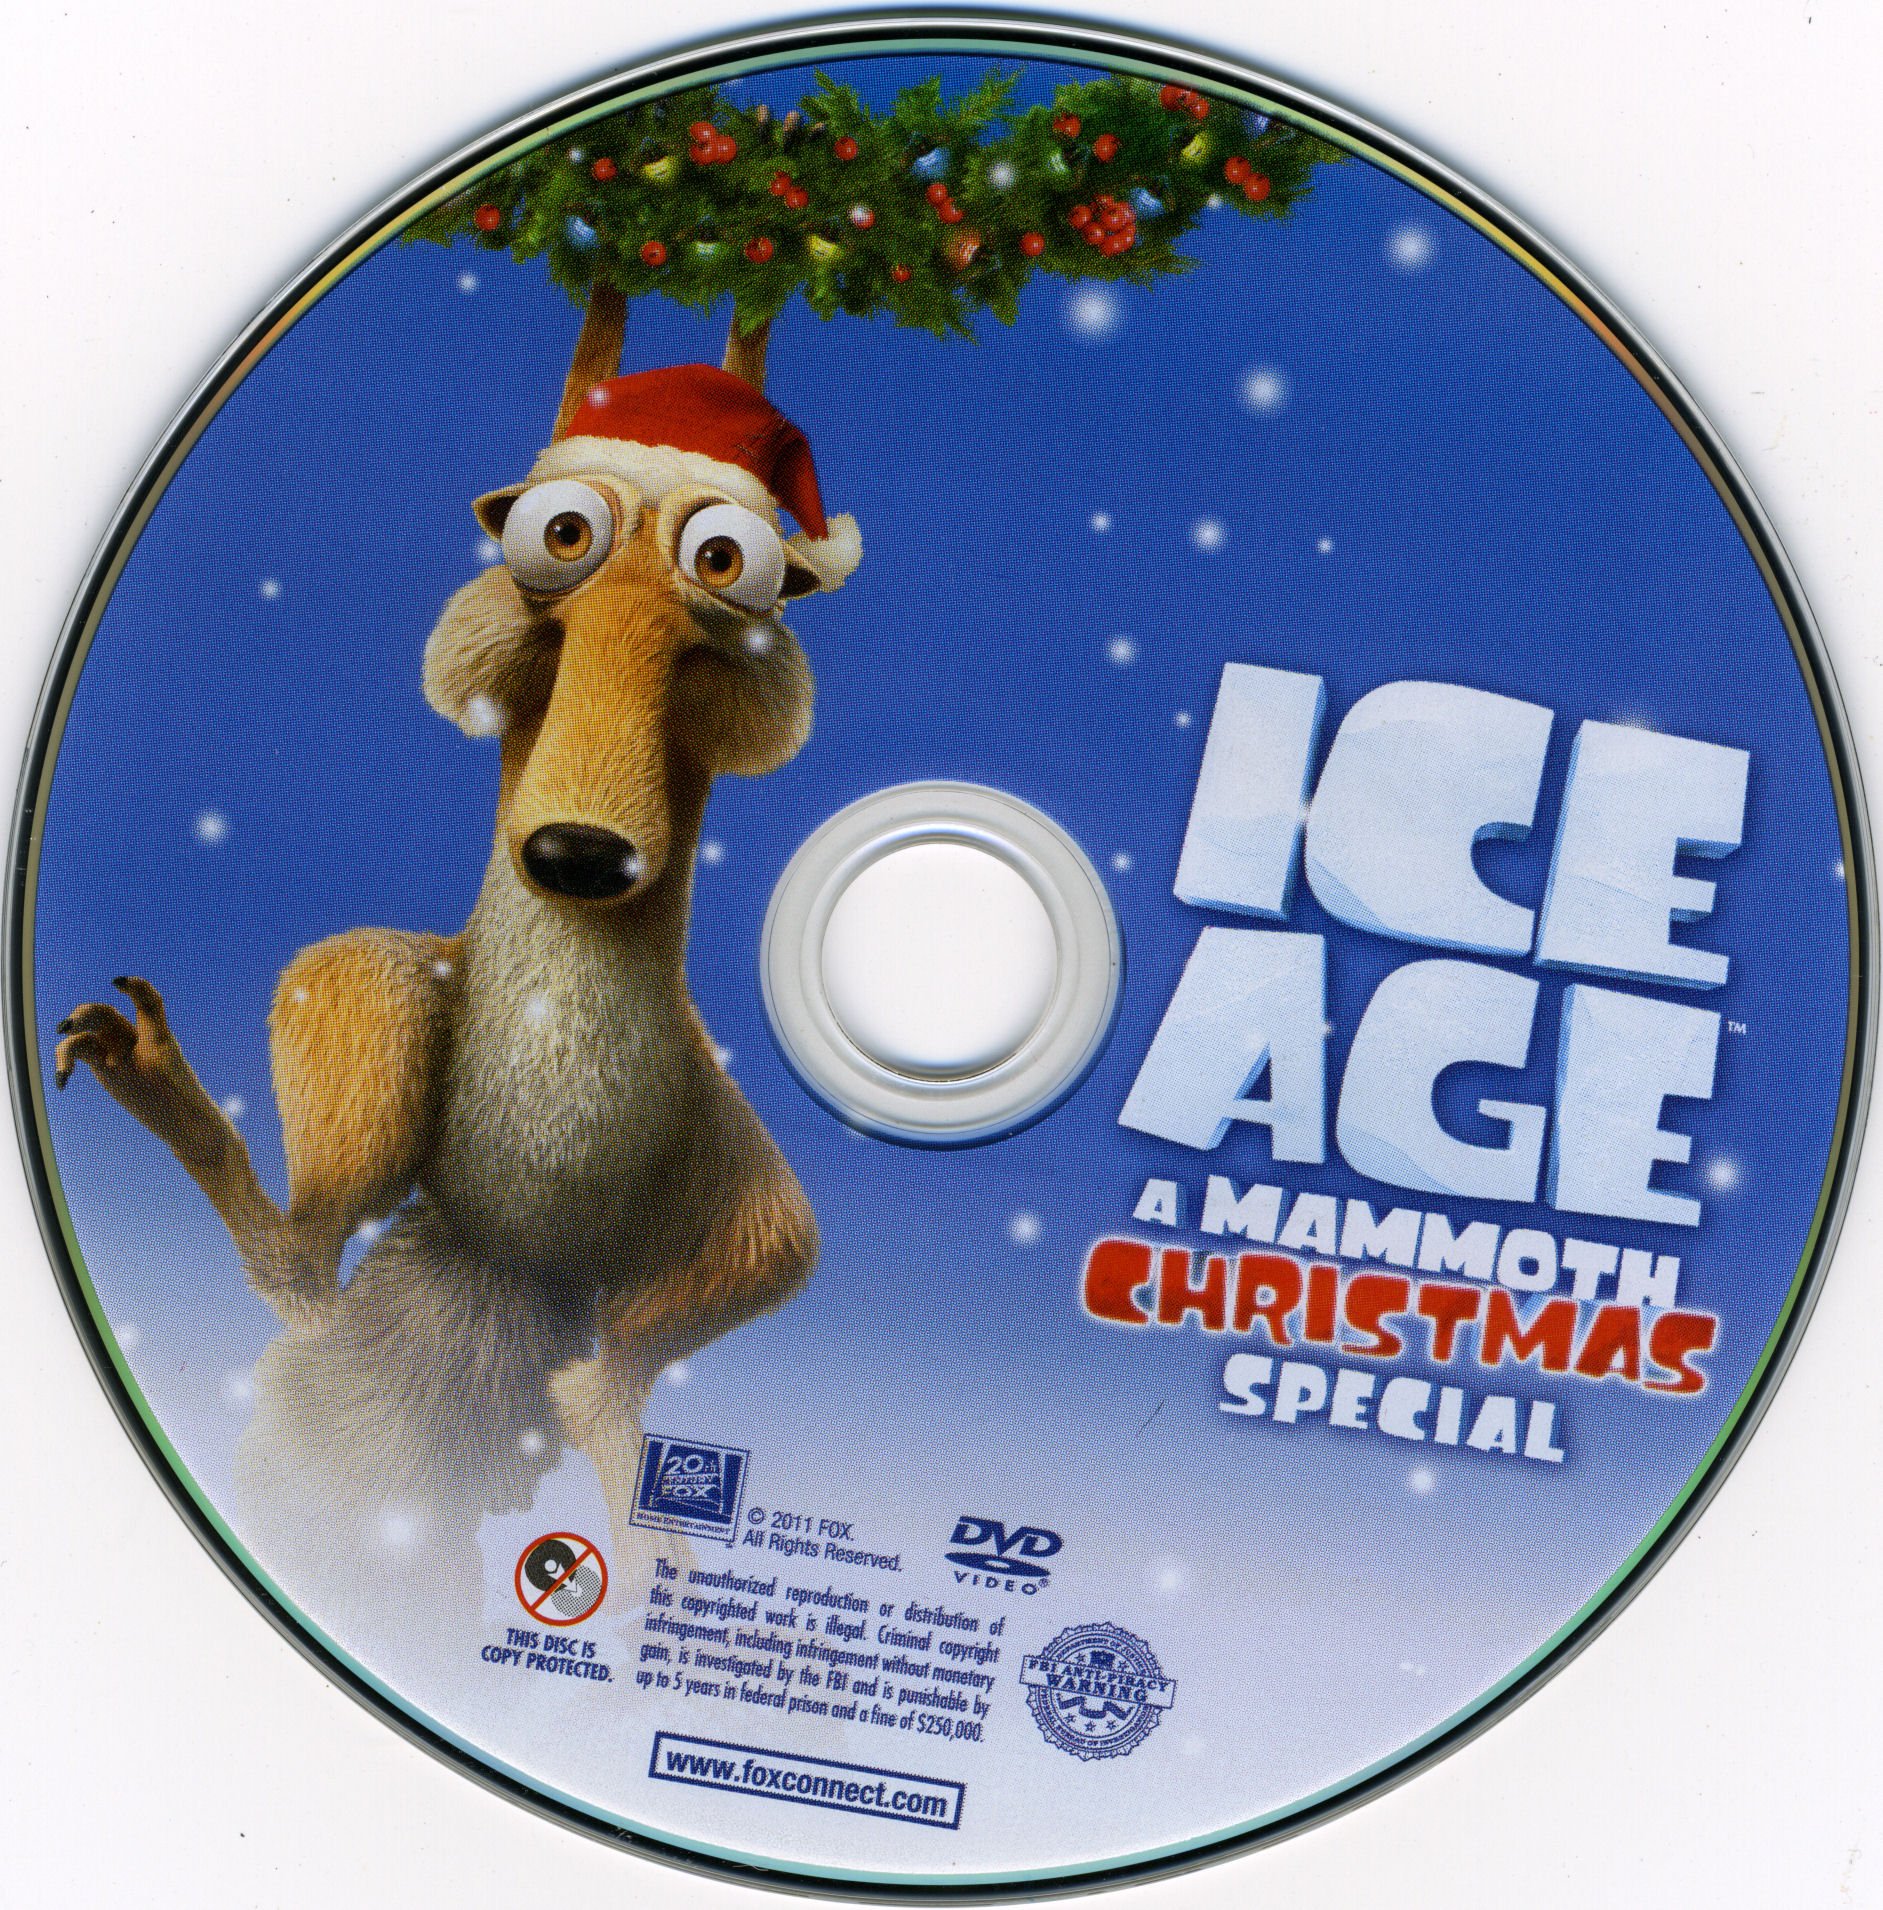 Ice Age A Mammoth Christmas Special 2011 Blu Ray Cover Labels 1.jpg.